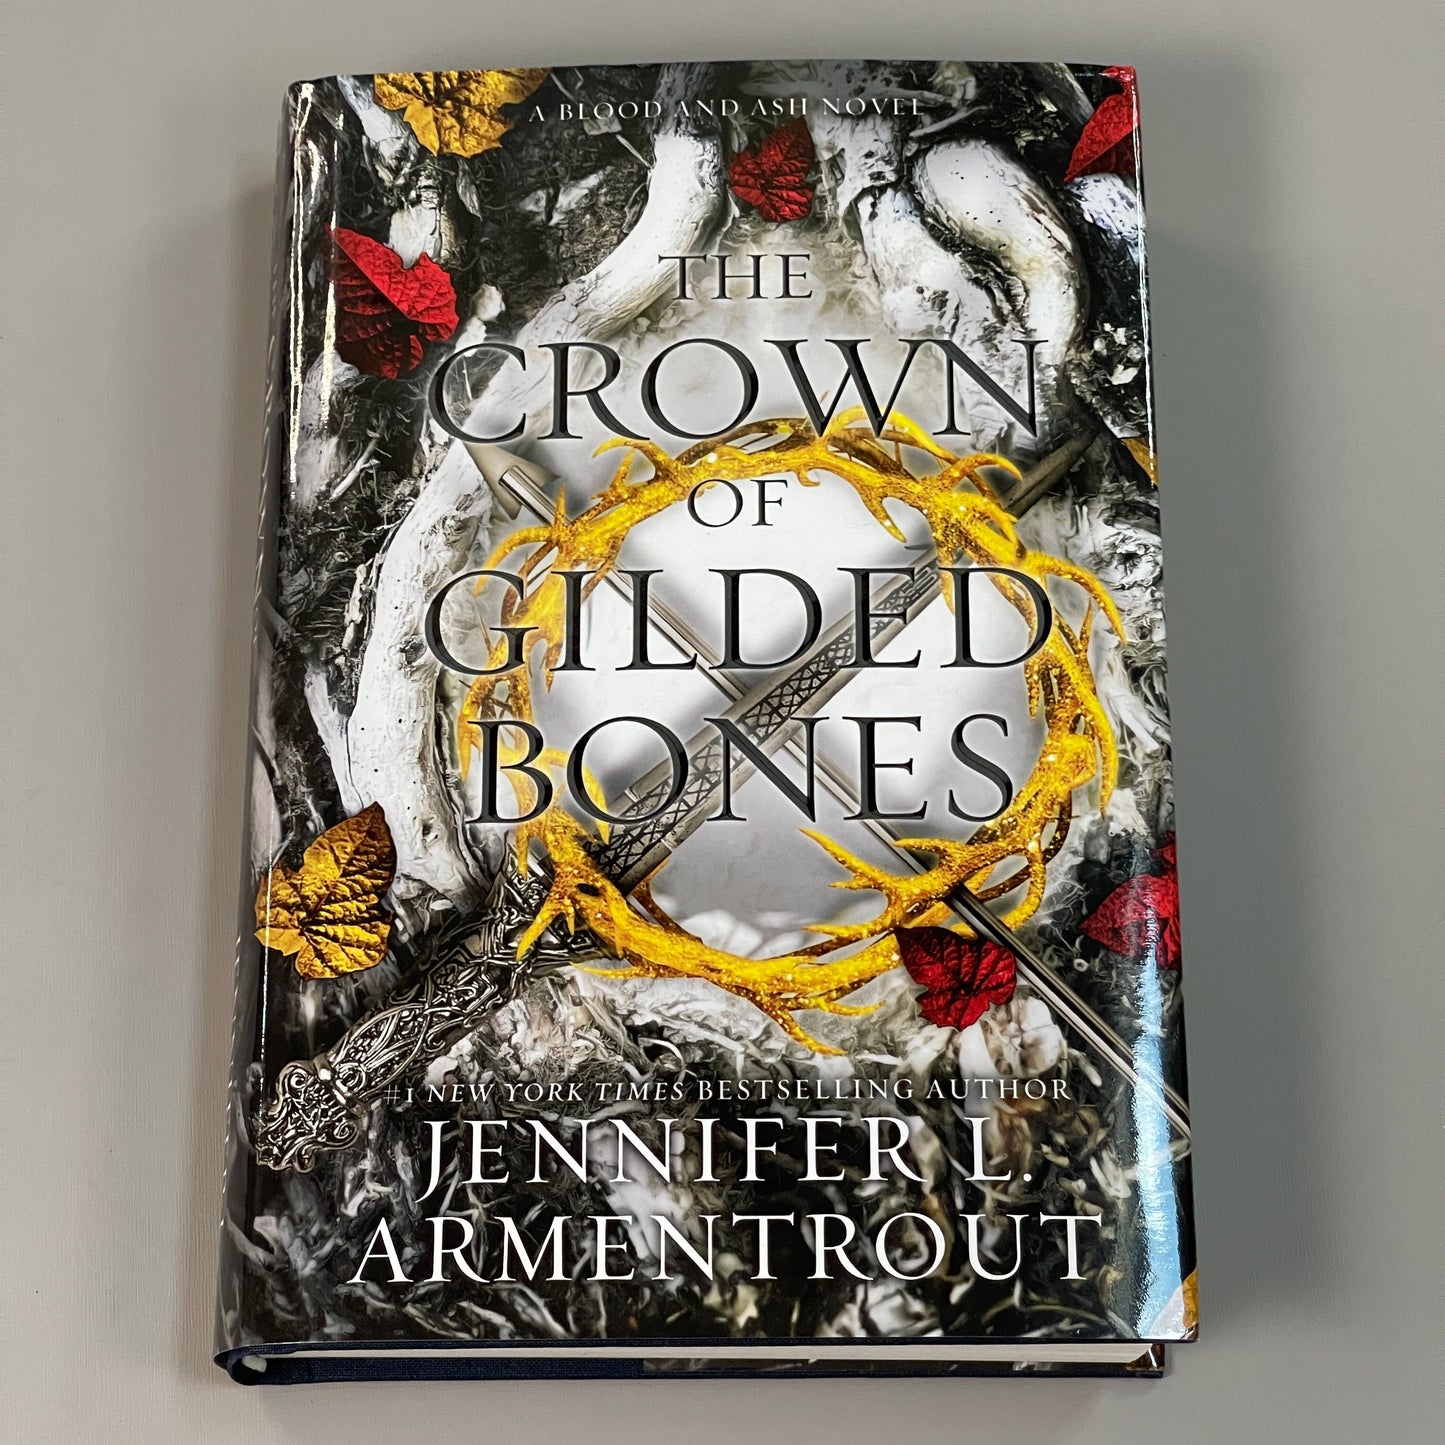 ZA@ THE CROWN OF GILDED BONES (Blood and Ash, 3) Hardcover Jennifer L. Armentrout (New Other)